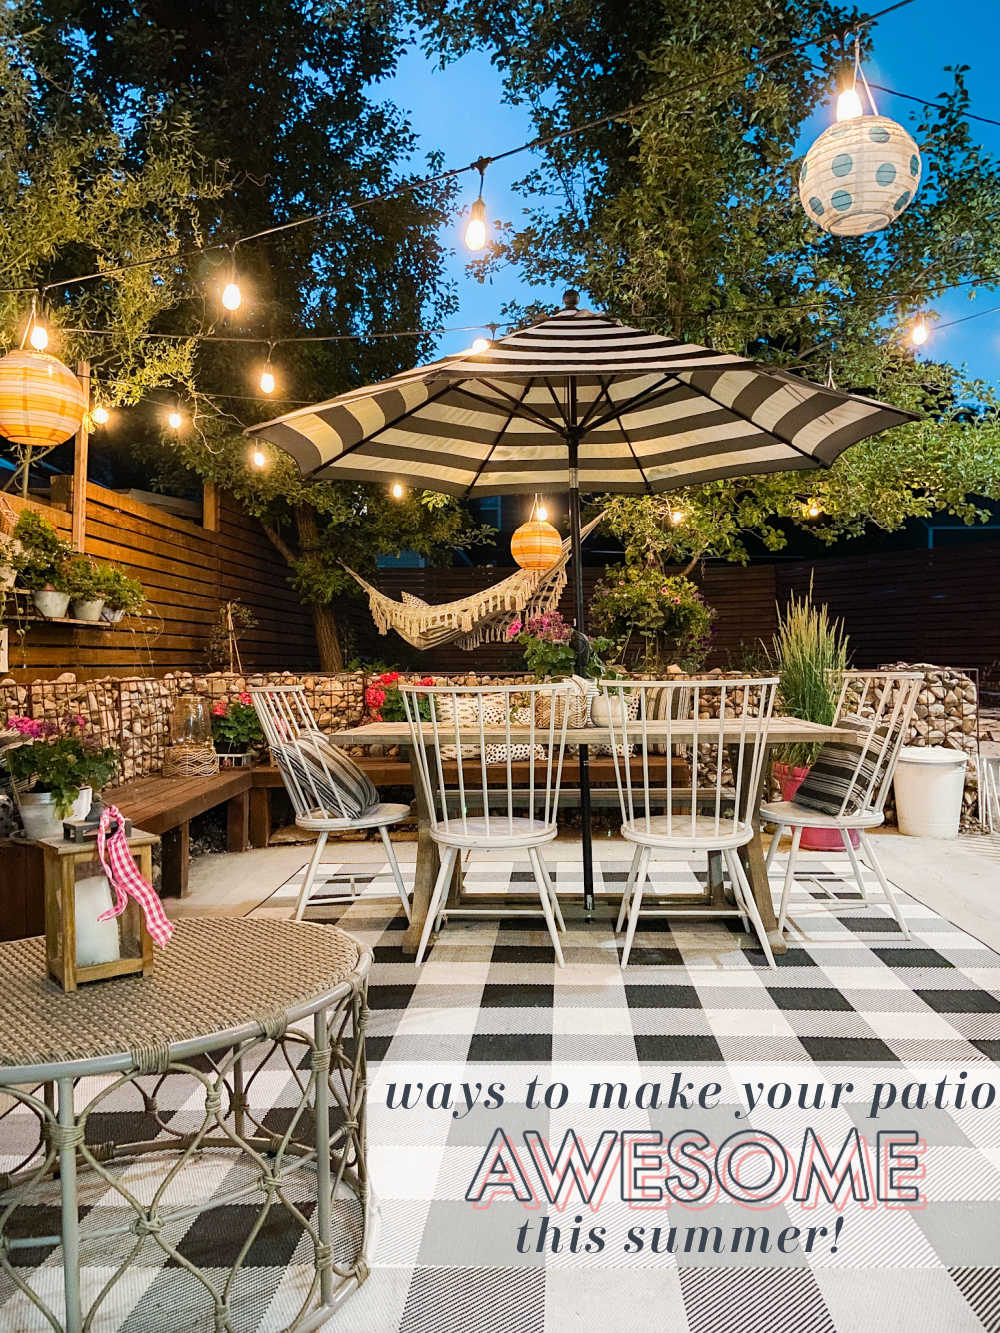 18 Ideas that will make your patio awesome this summer! Easy DIY ideas to make your outdoor space even more enjoyable this summer! 